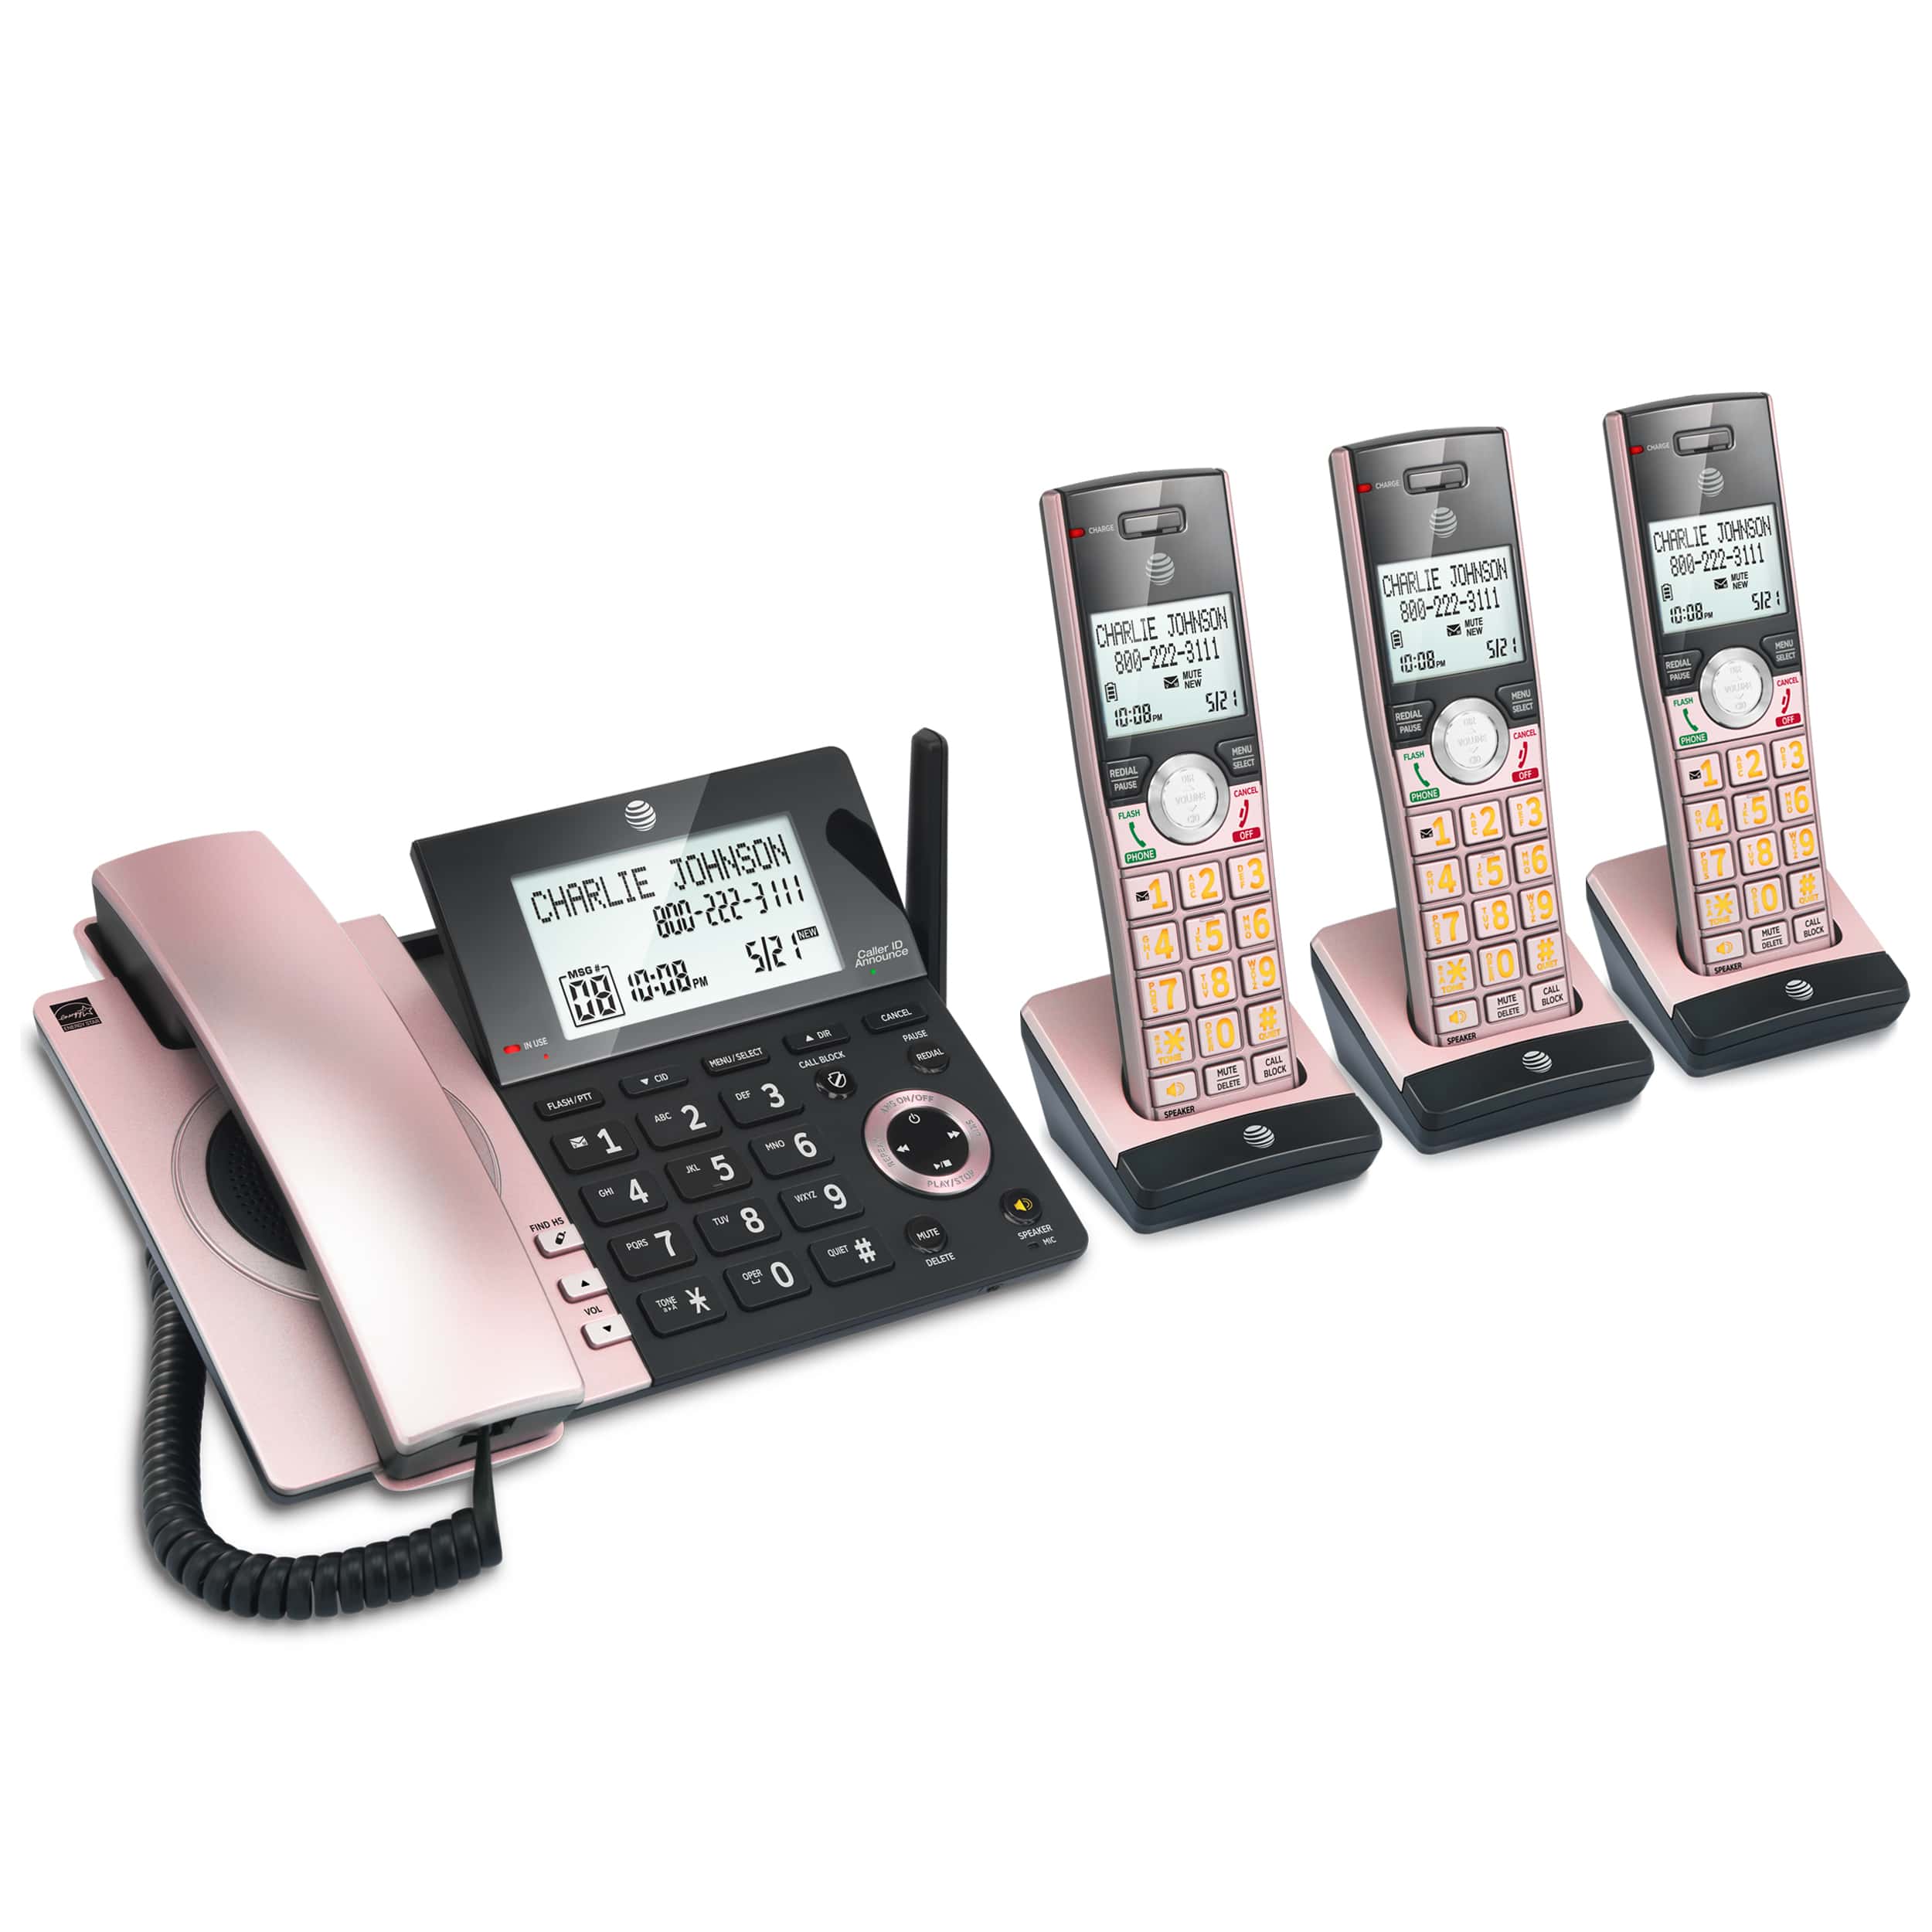 3 handset corded/cordless phone system with smart call blocker (Rose Gold/Black) - view 2